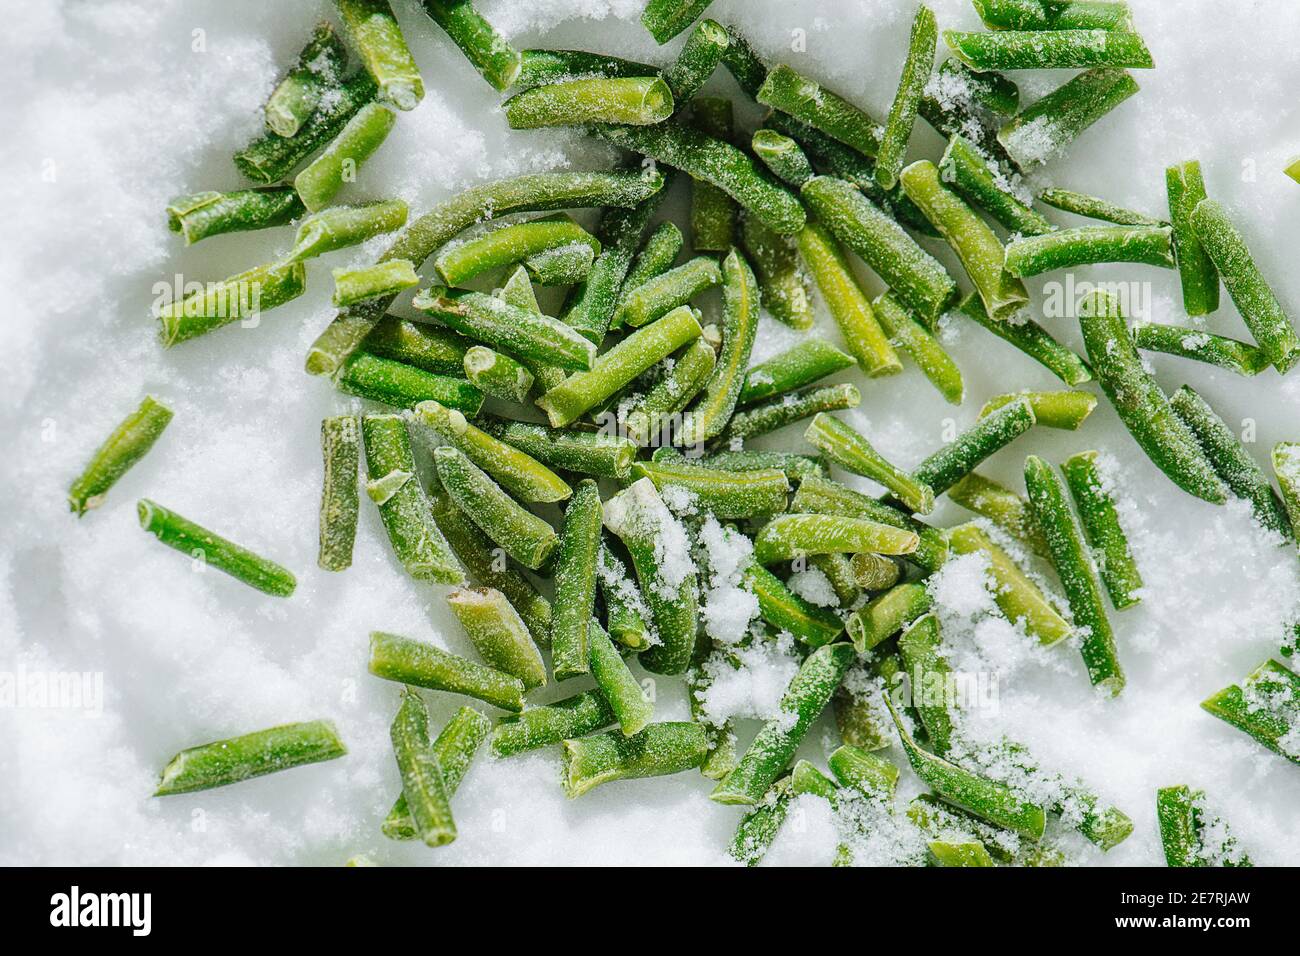 Spilled frozen green beans on a grinded ice. top view. Stock Photo